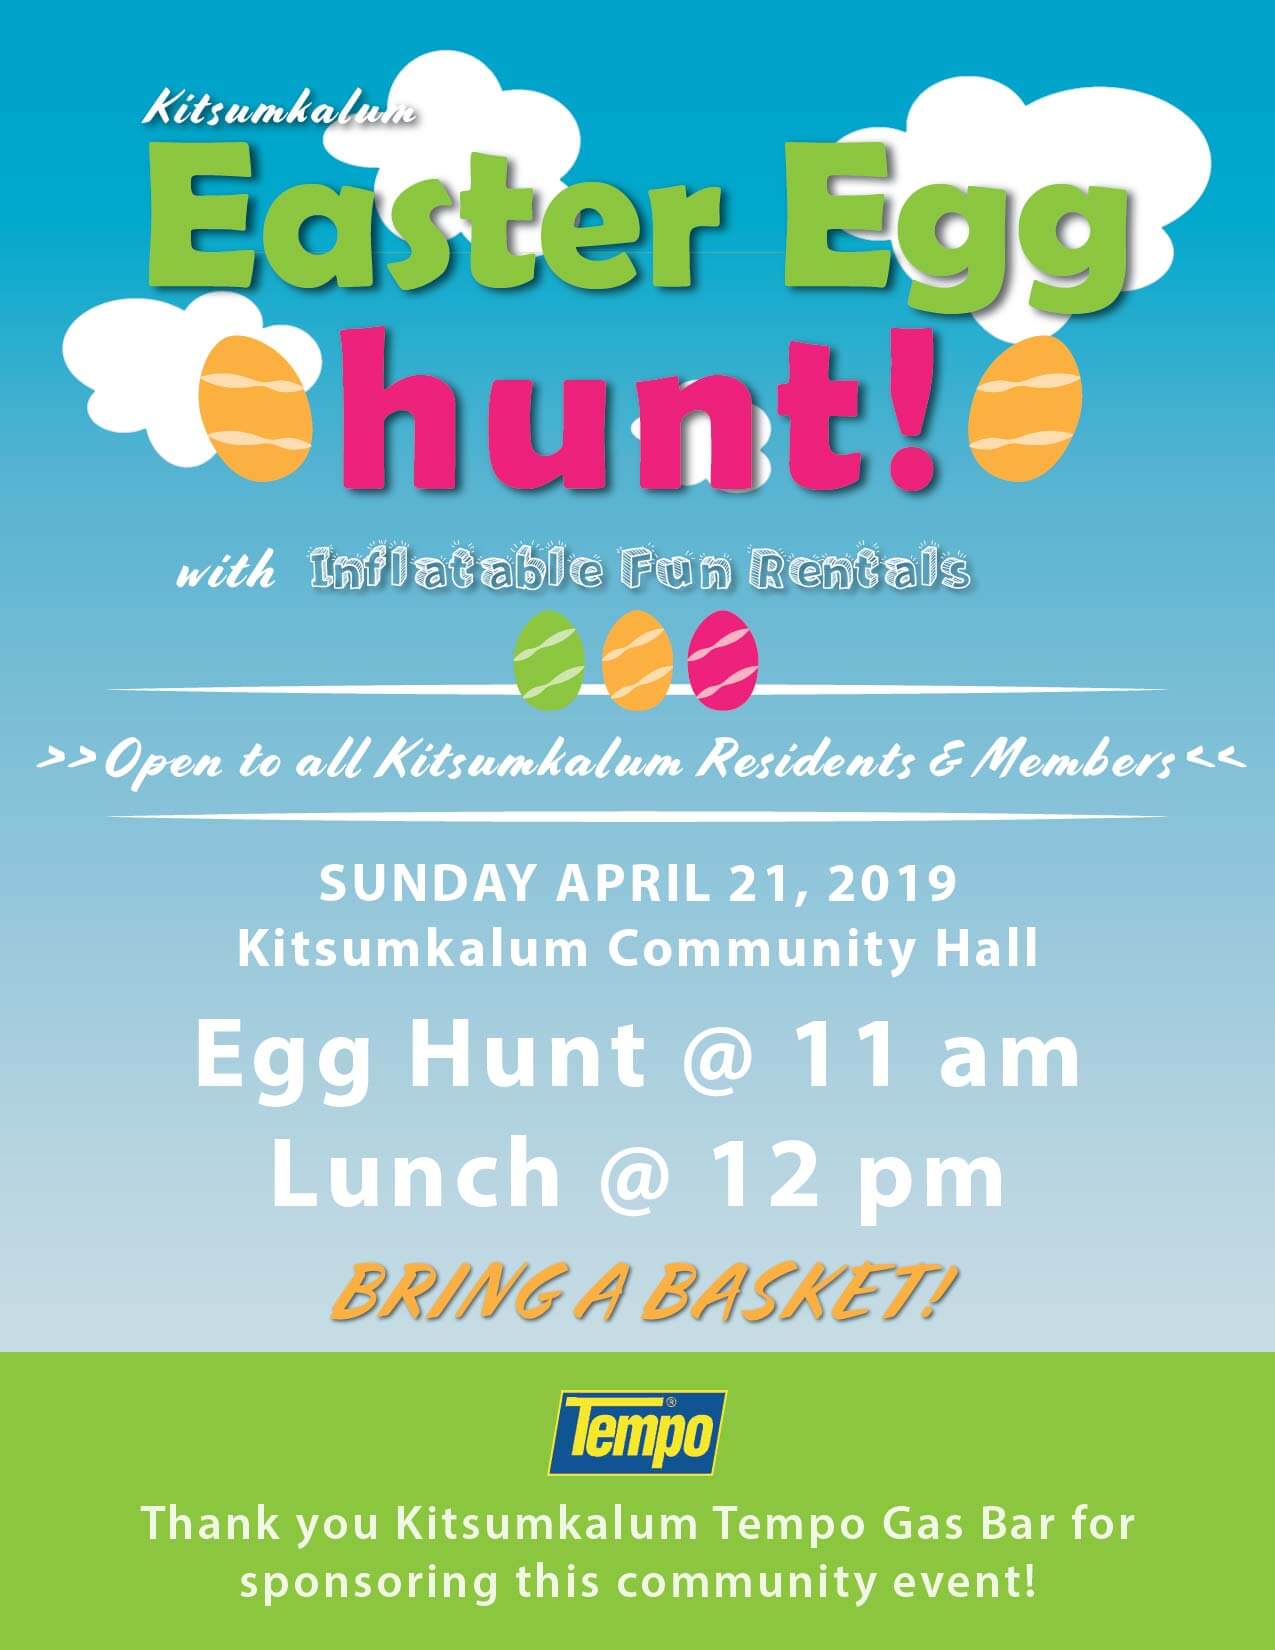 Easter Egg Hunt and Lunch for Kitsumkalum Members and Residents APRIL 21